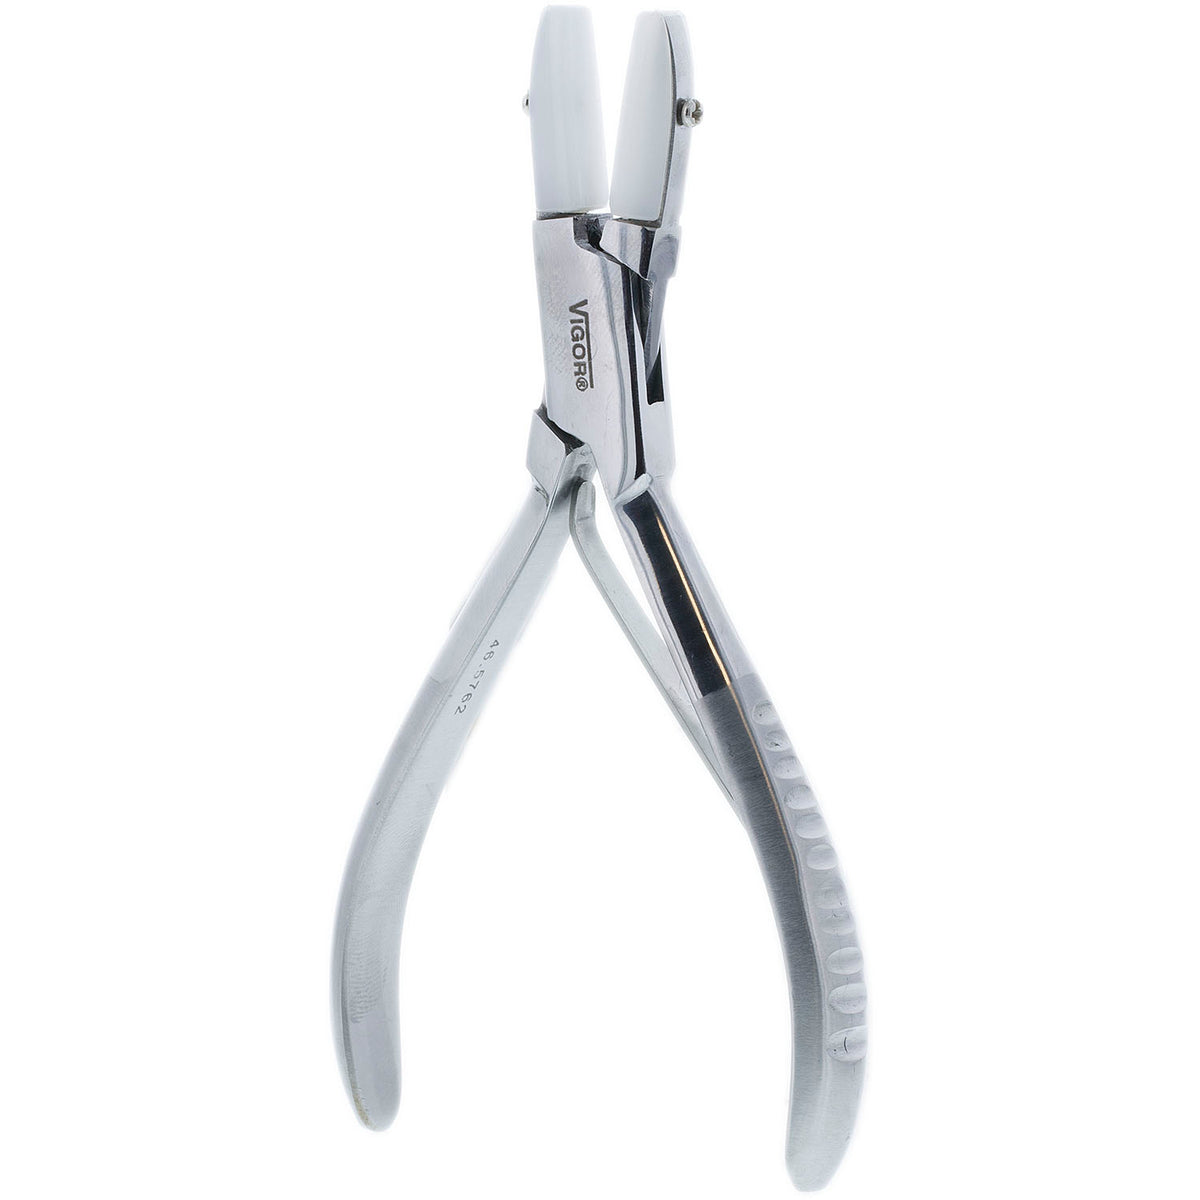 Knipex Tools - Round Nose Pliers, Chrome, Jeweler's Pliers